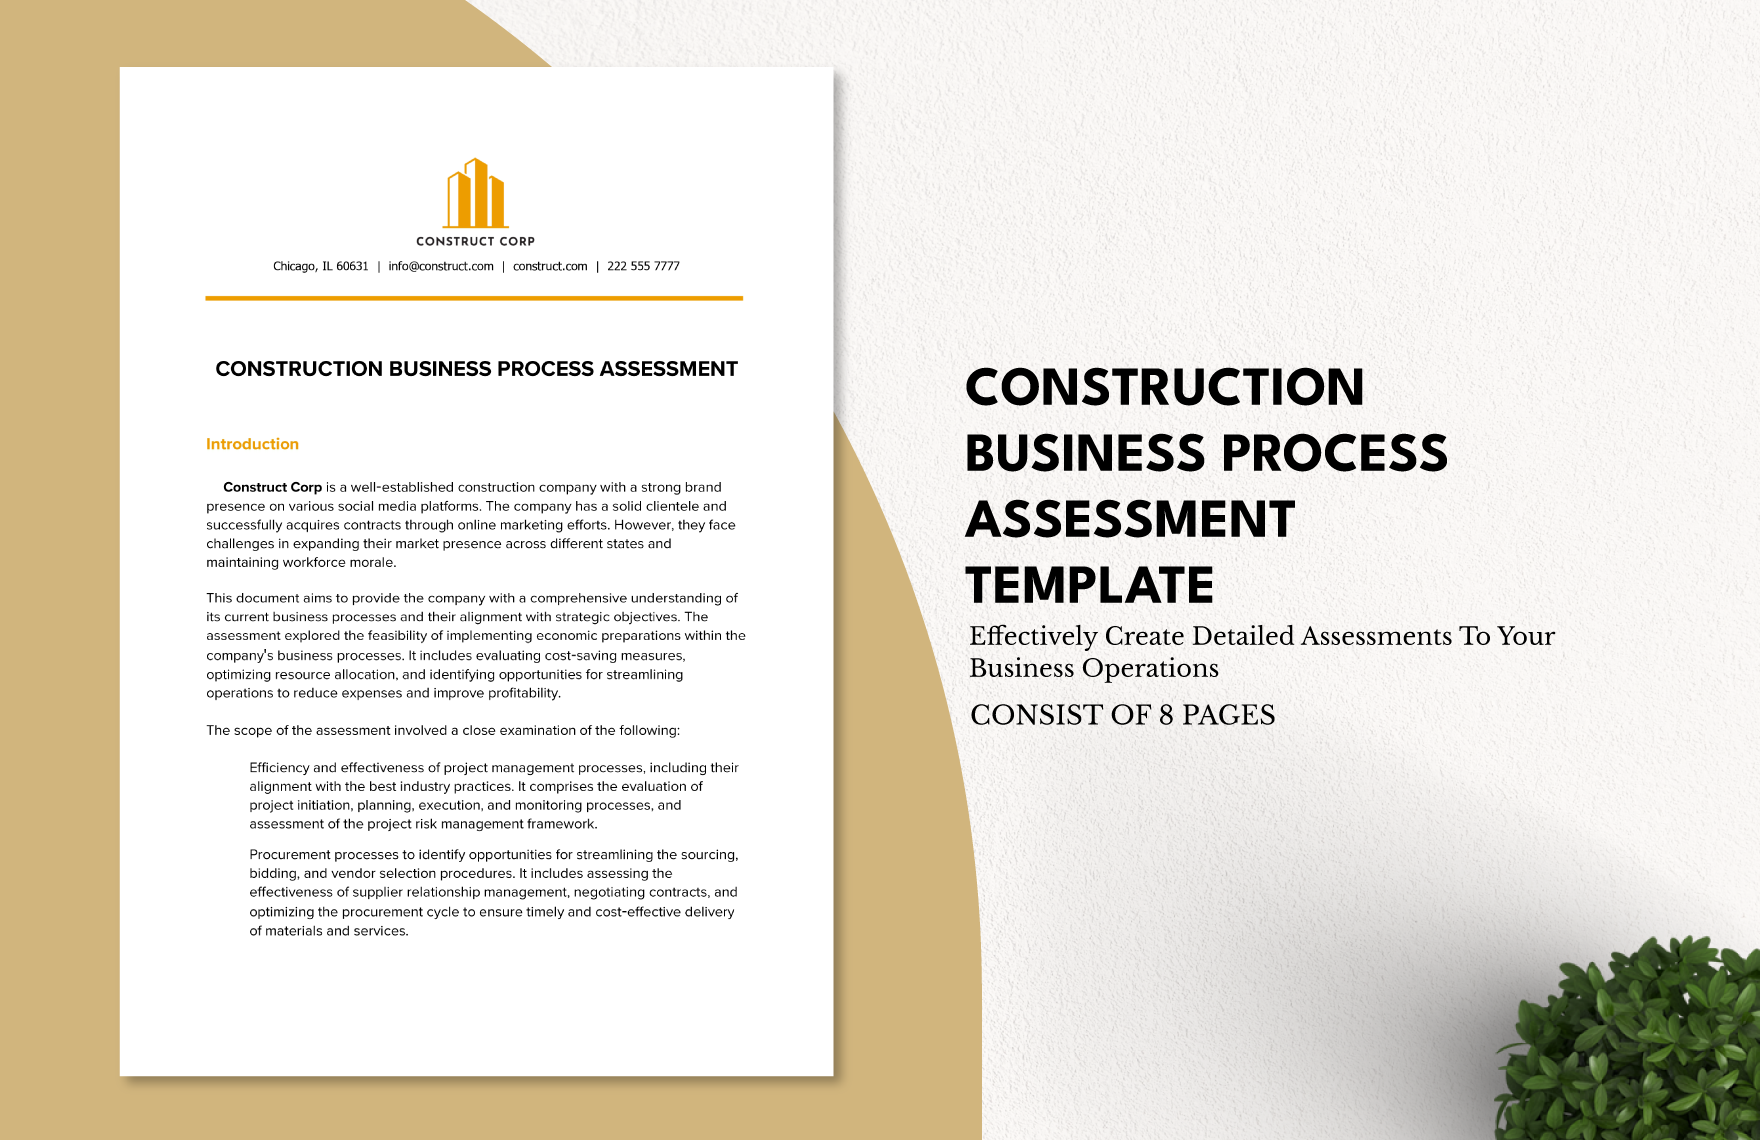 Construction Business Process Assessment Template in Word, Google Docs